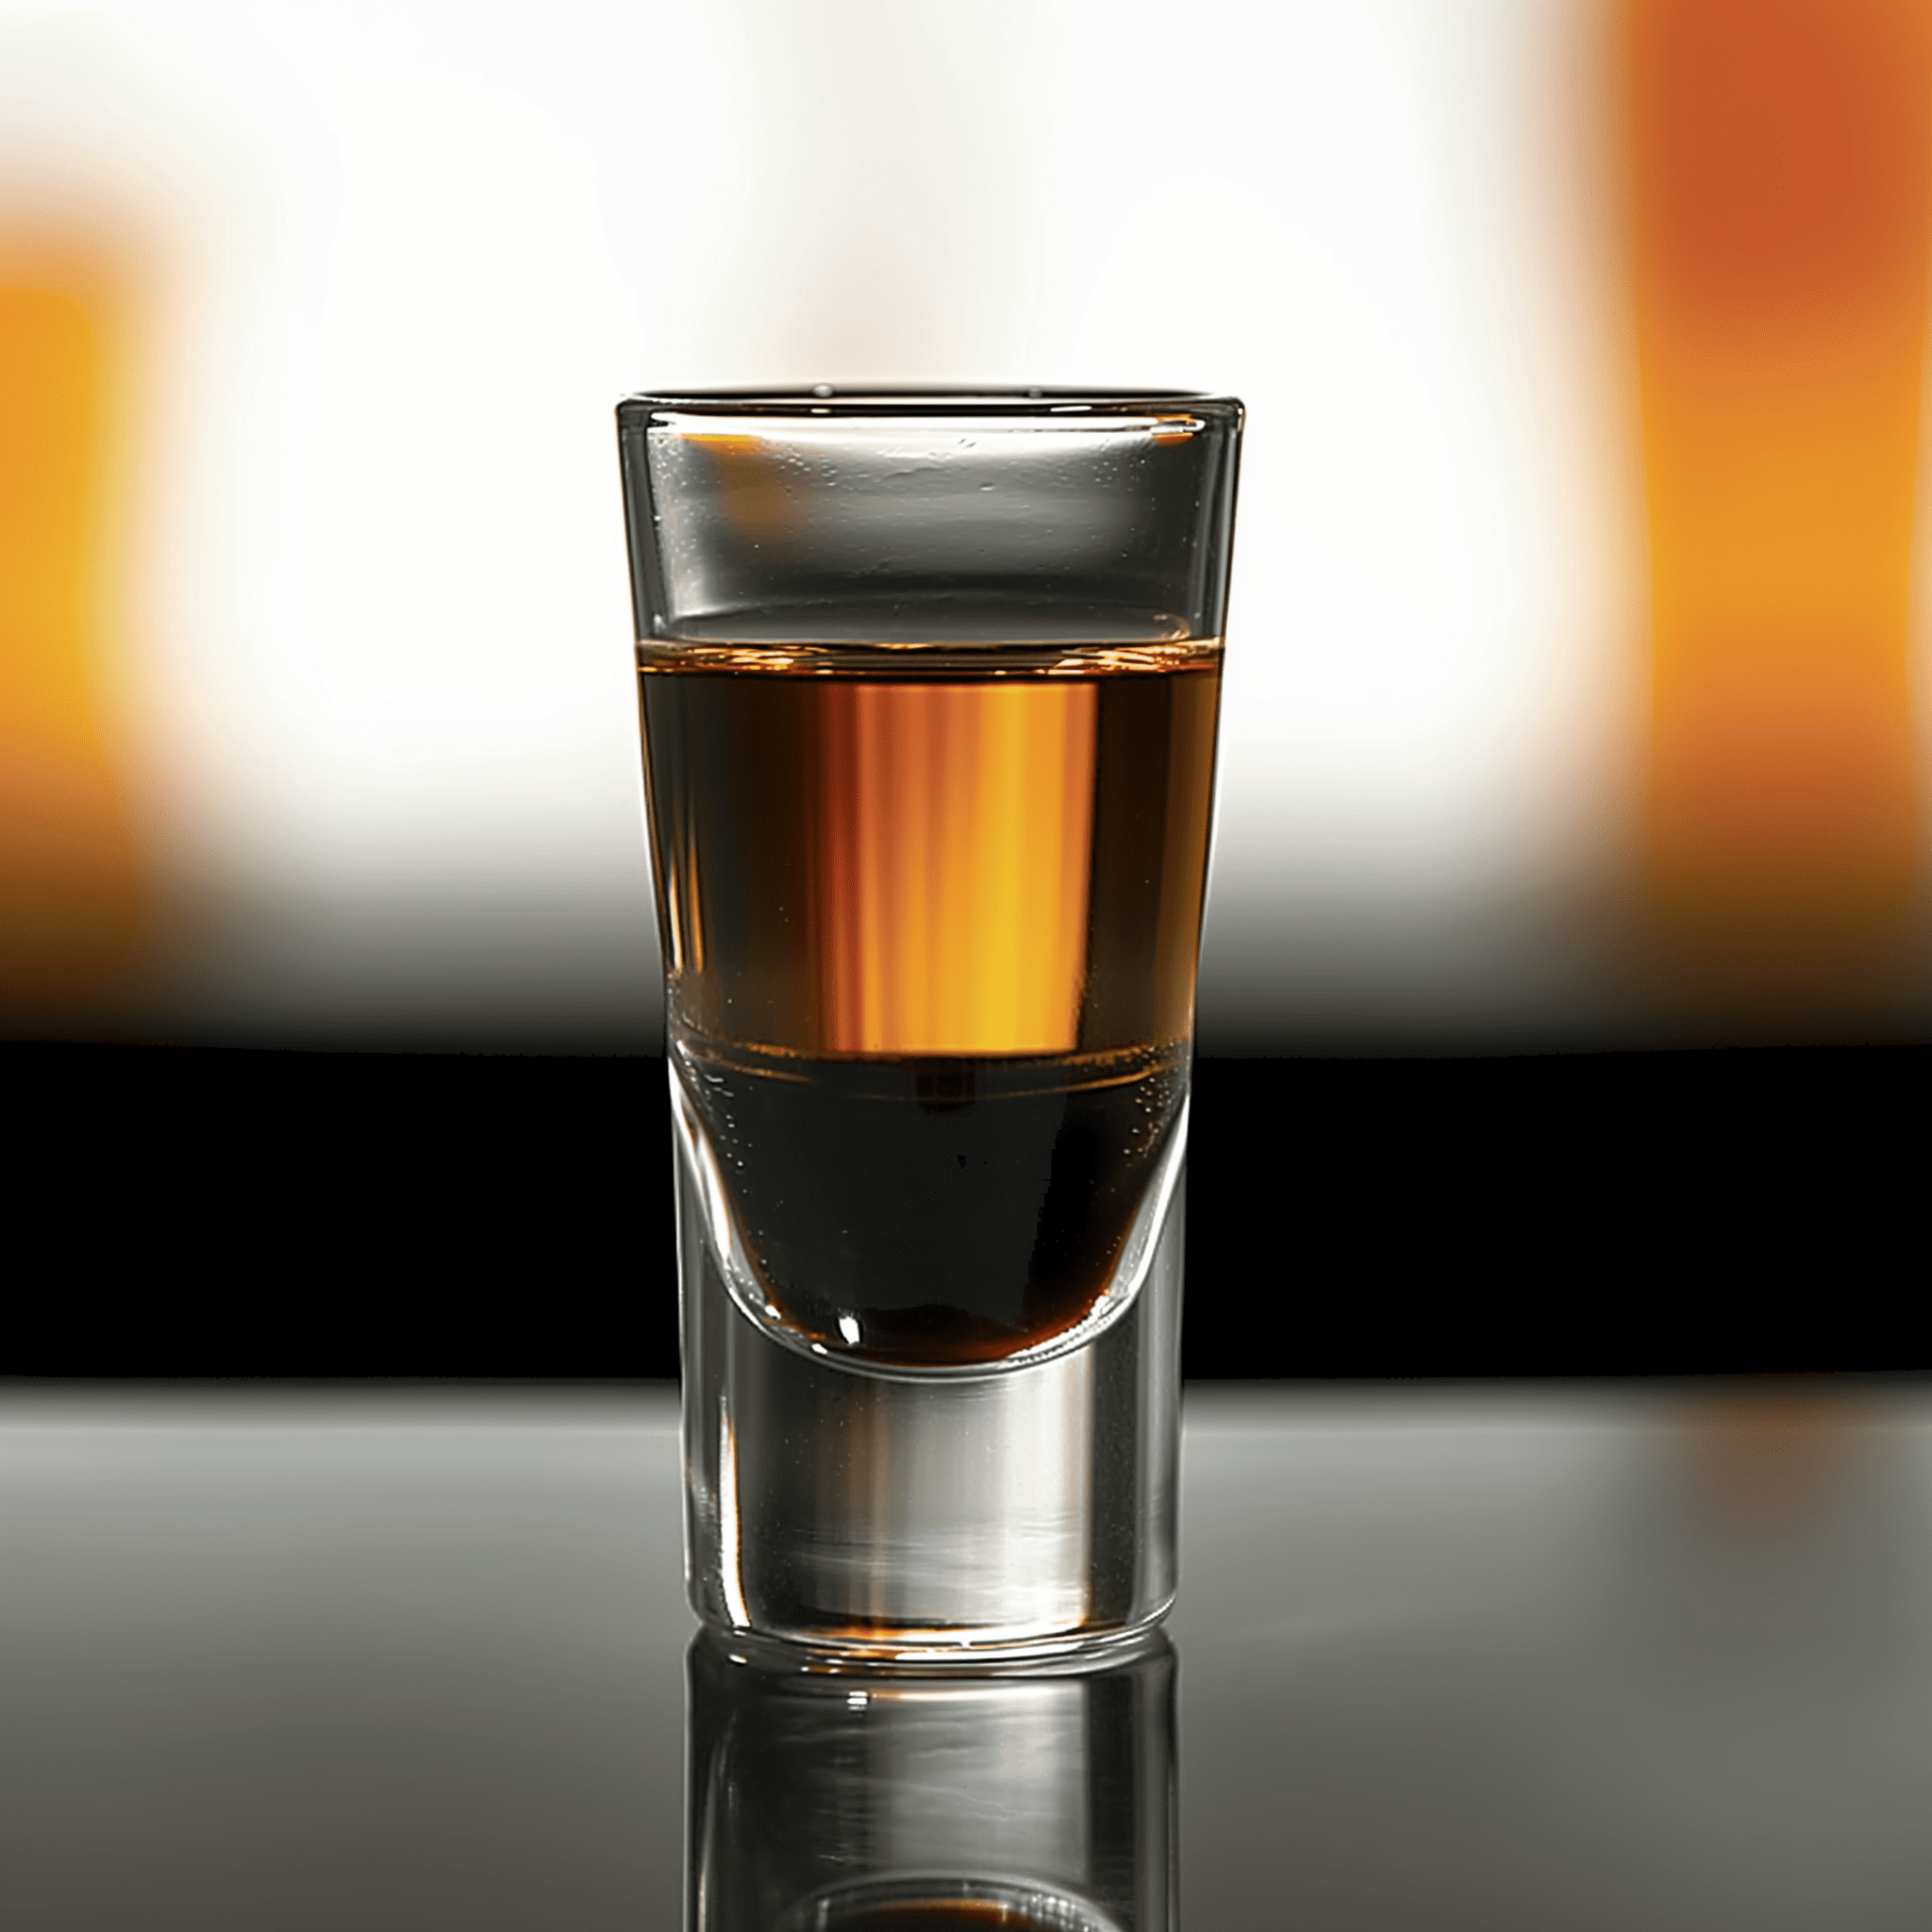 Black Jack Shot Recipe - The Black Jack Shot is a bold combination of sweet, herbal, and smoky flavors. The black sambuca provides a deep, licorice-like sweetness, while the whiskey adds a layer of warmth and complexity with its smoky, woody undertones. It's a strong shot that's not for the faint of heart.